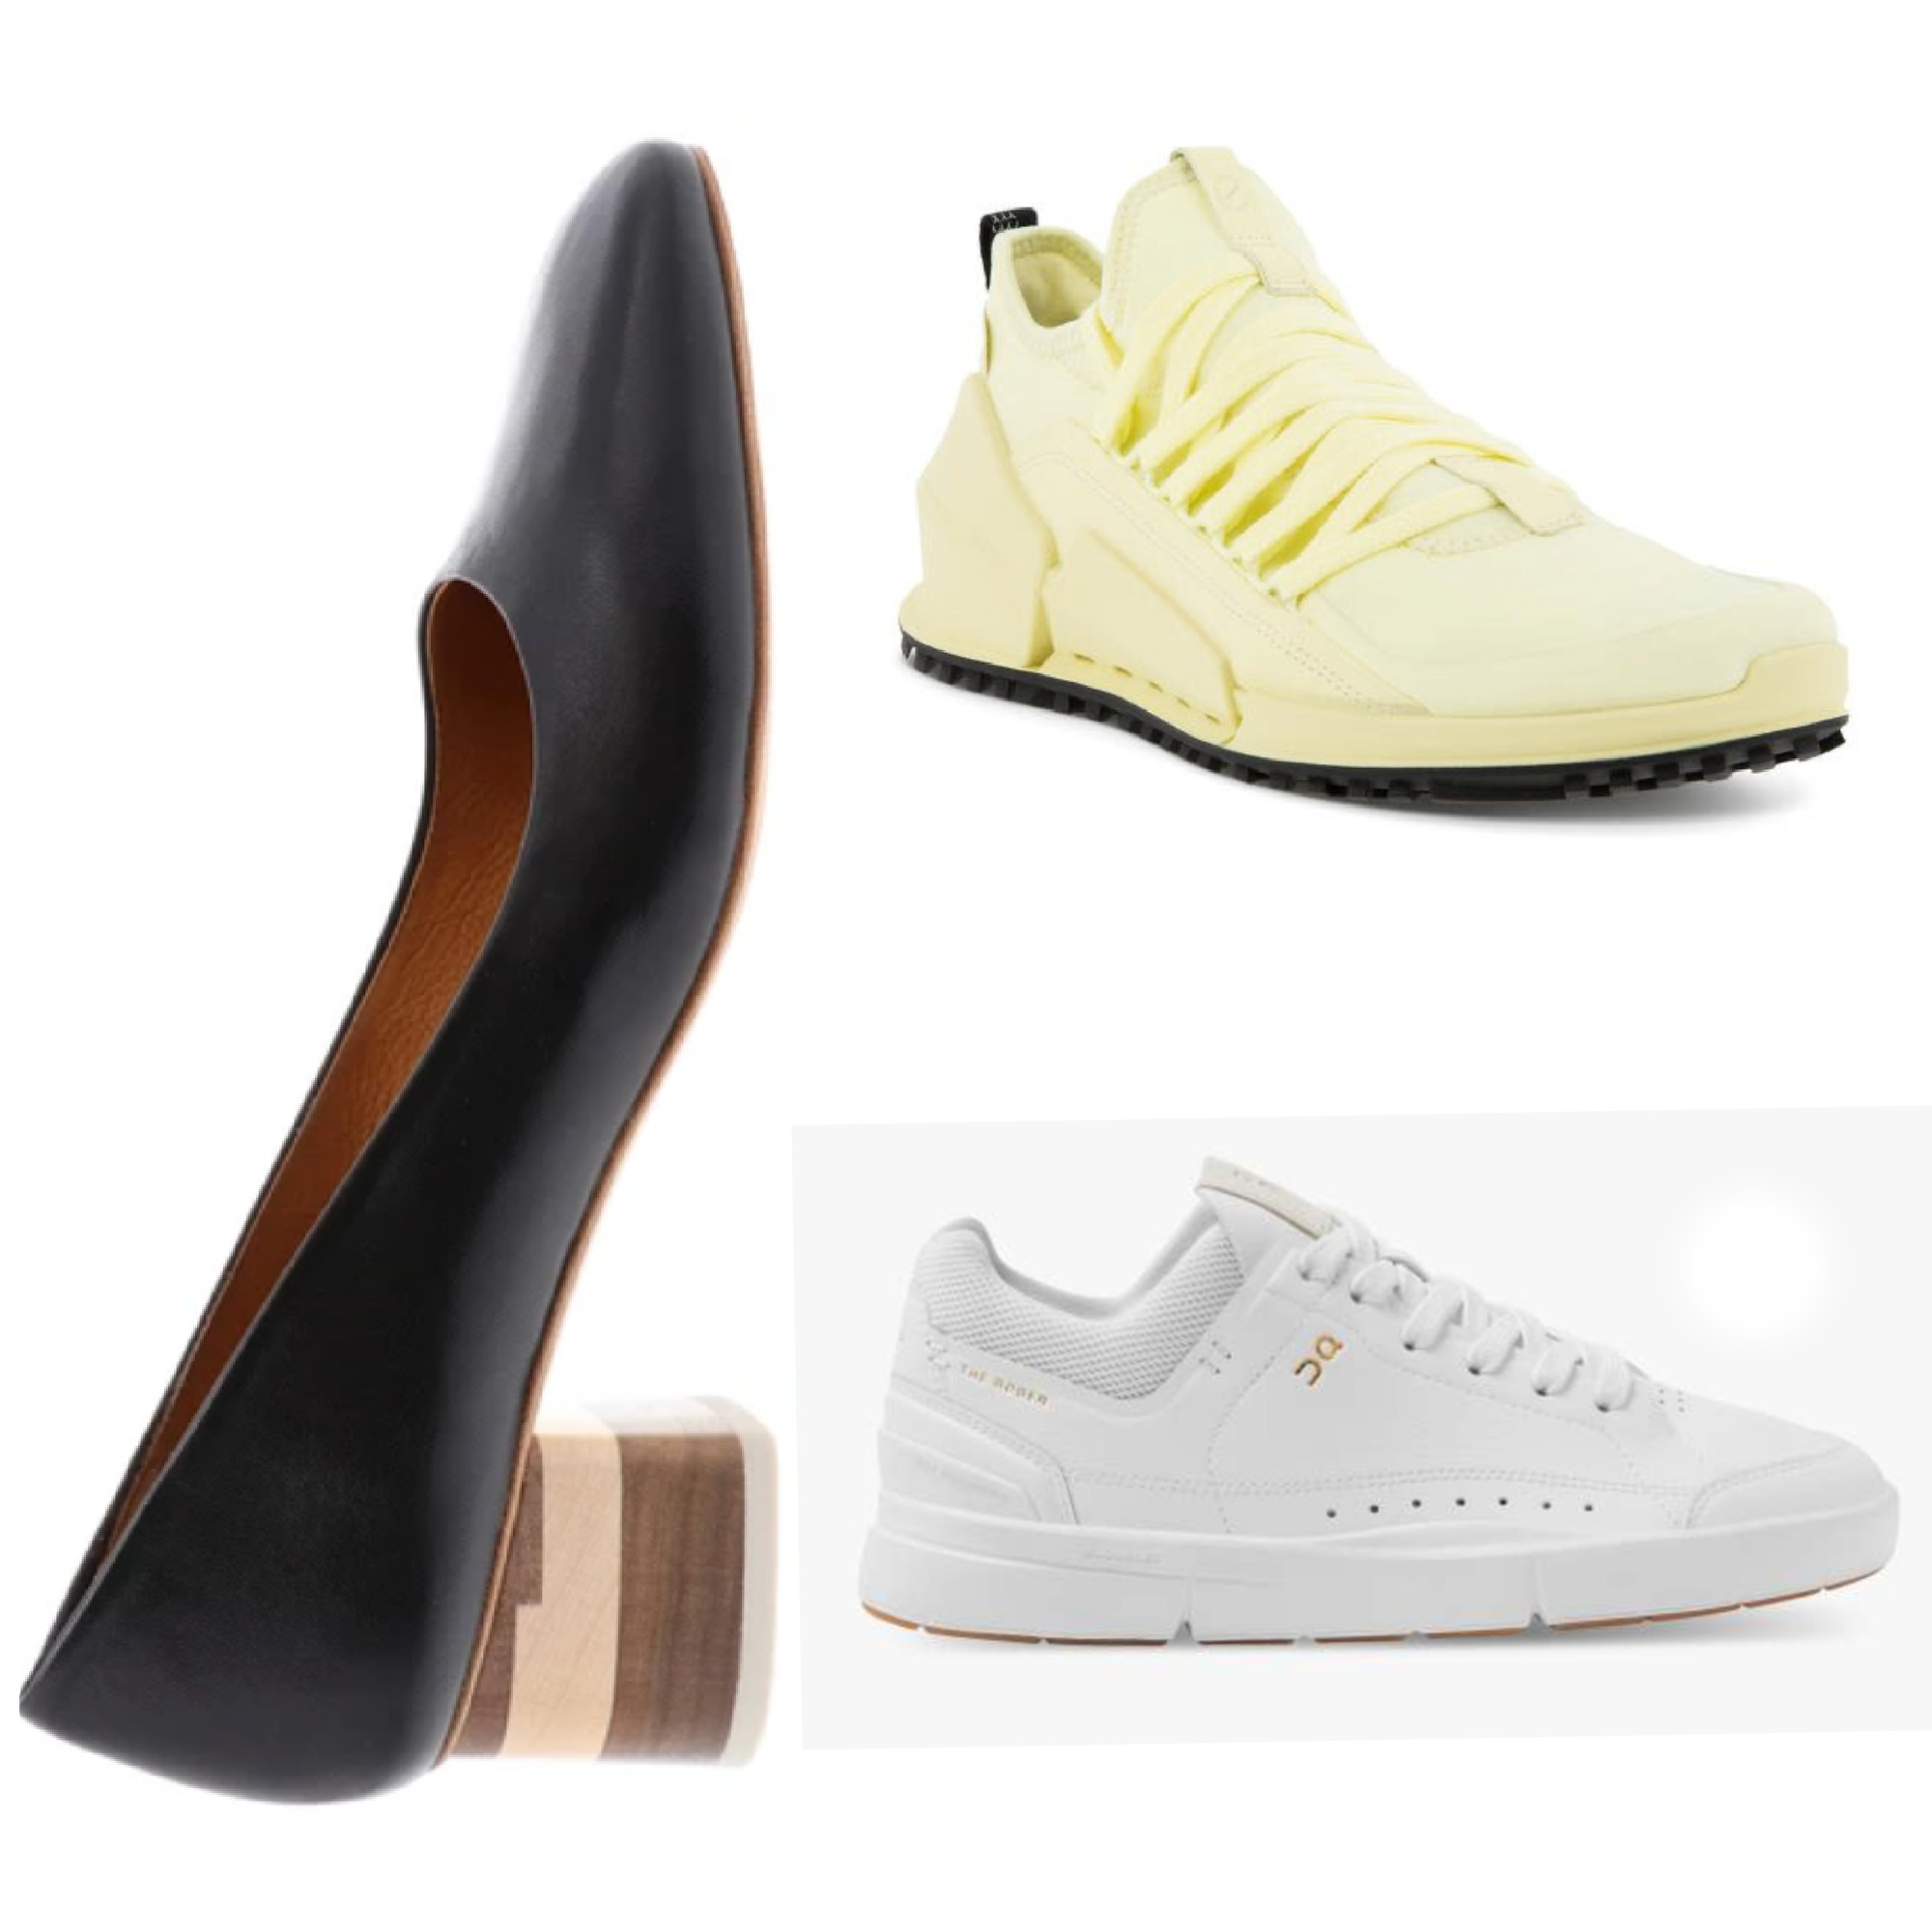 Getting and spending: Shopping spring shoes